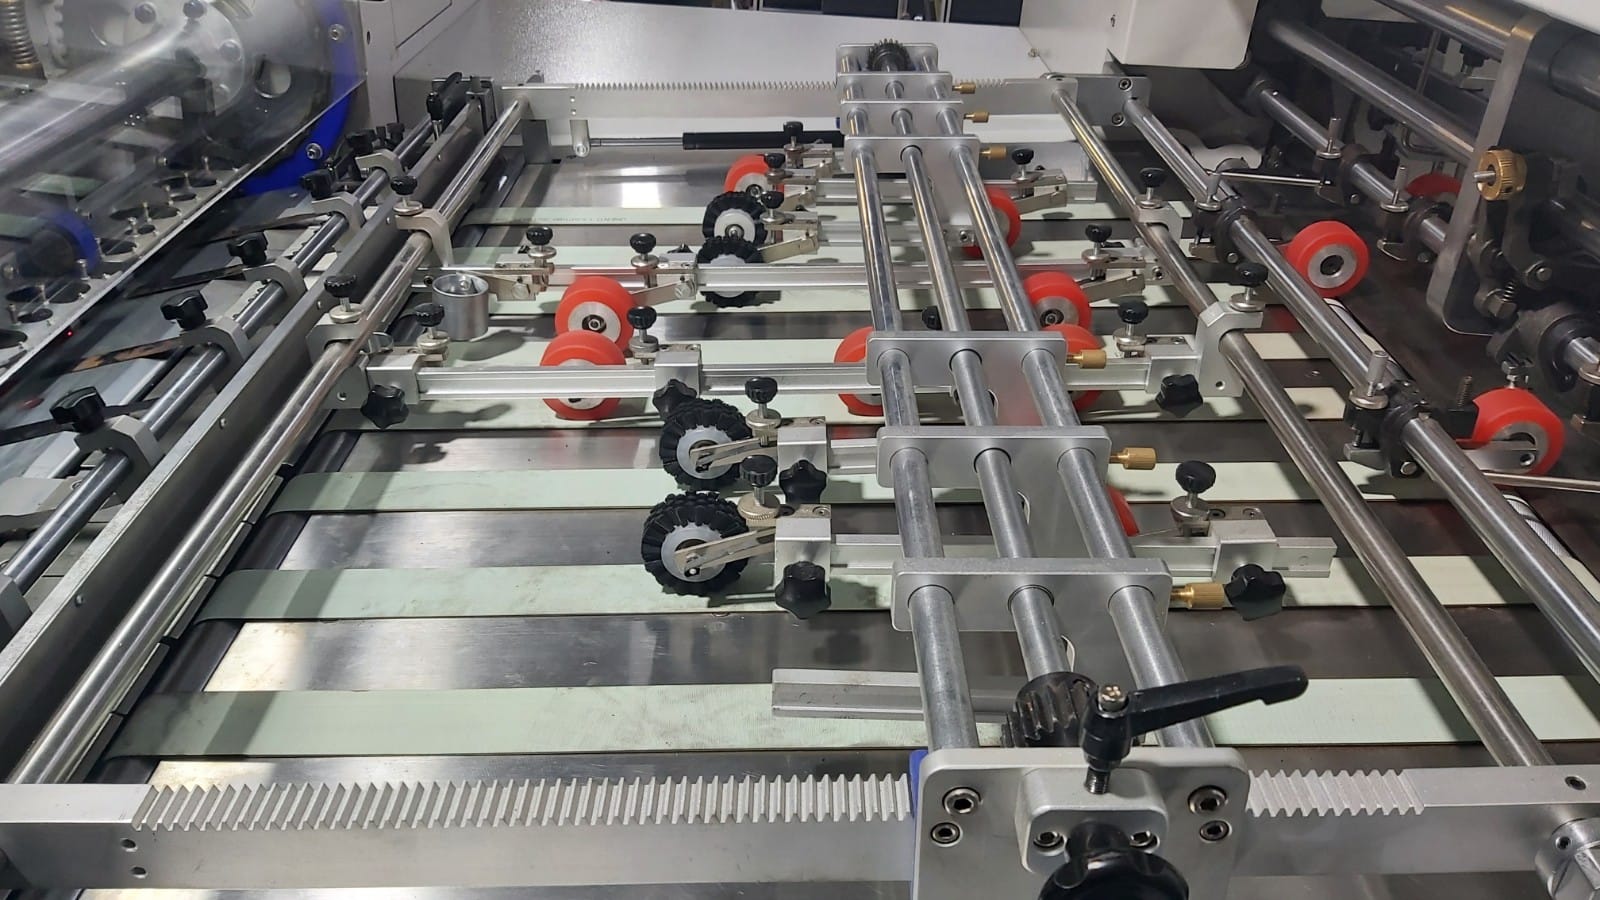 Successful installation by The Royo Machinery Team - DGM Technocut 1050S Automatic Die Cutter